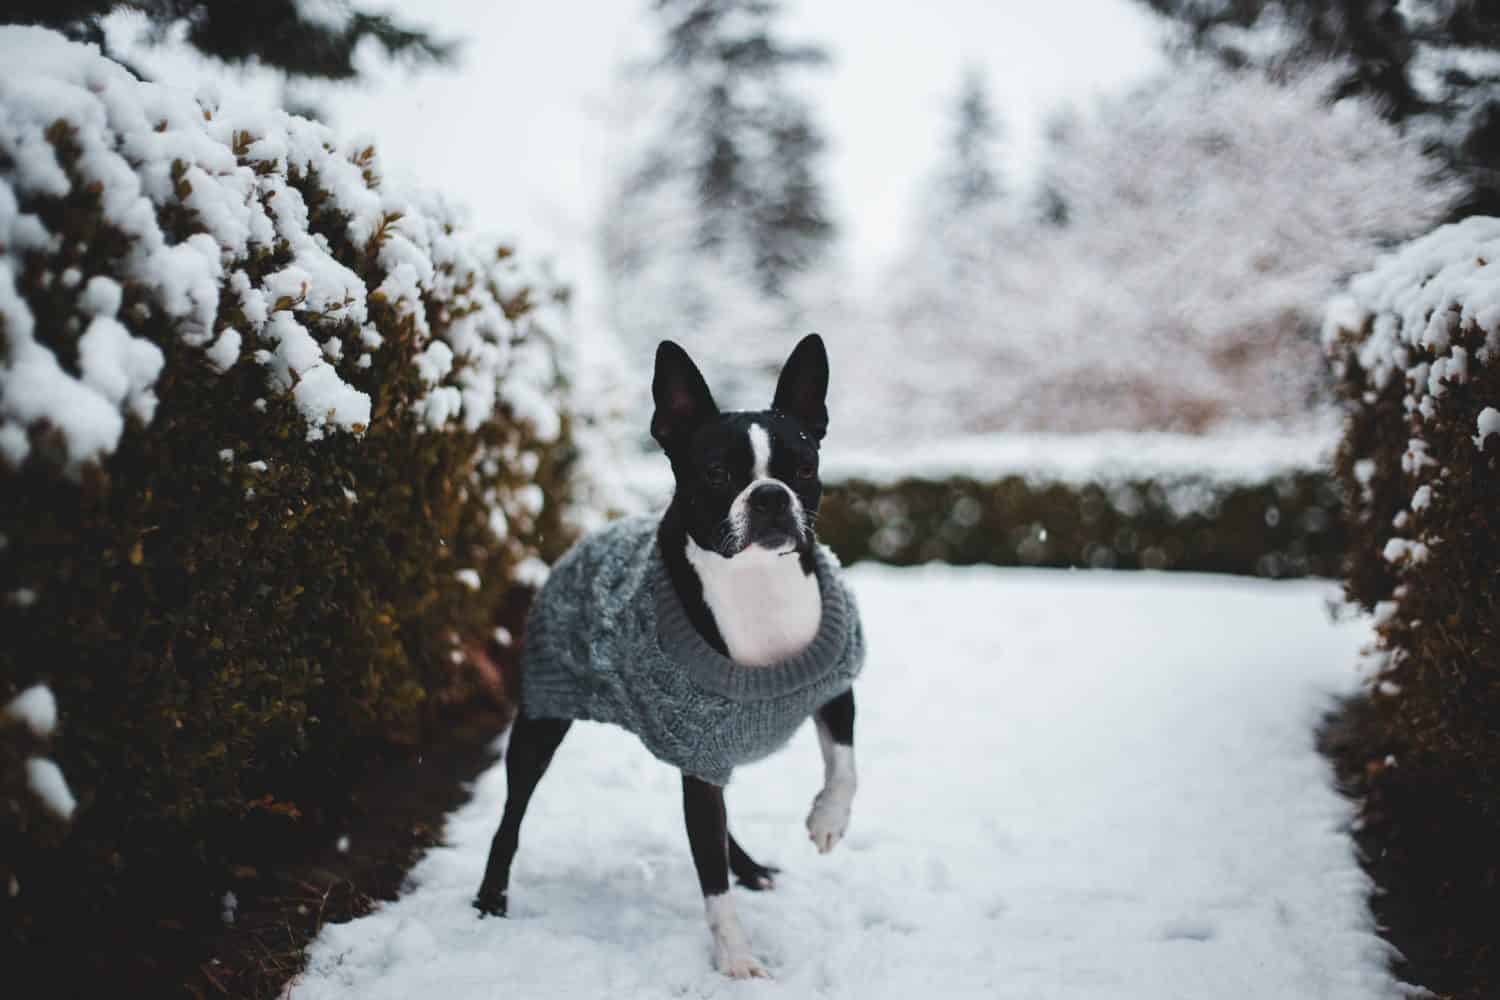 Boston Terrier wearing a sweater in the snow